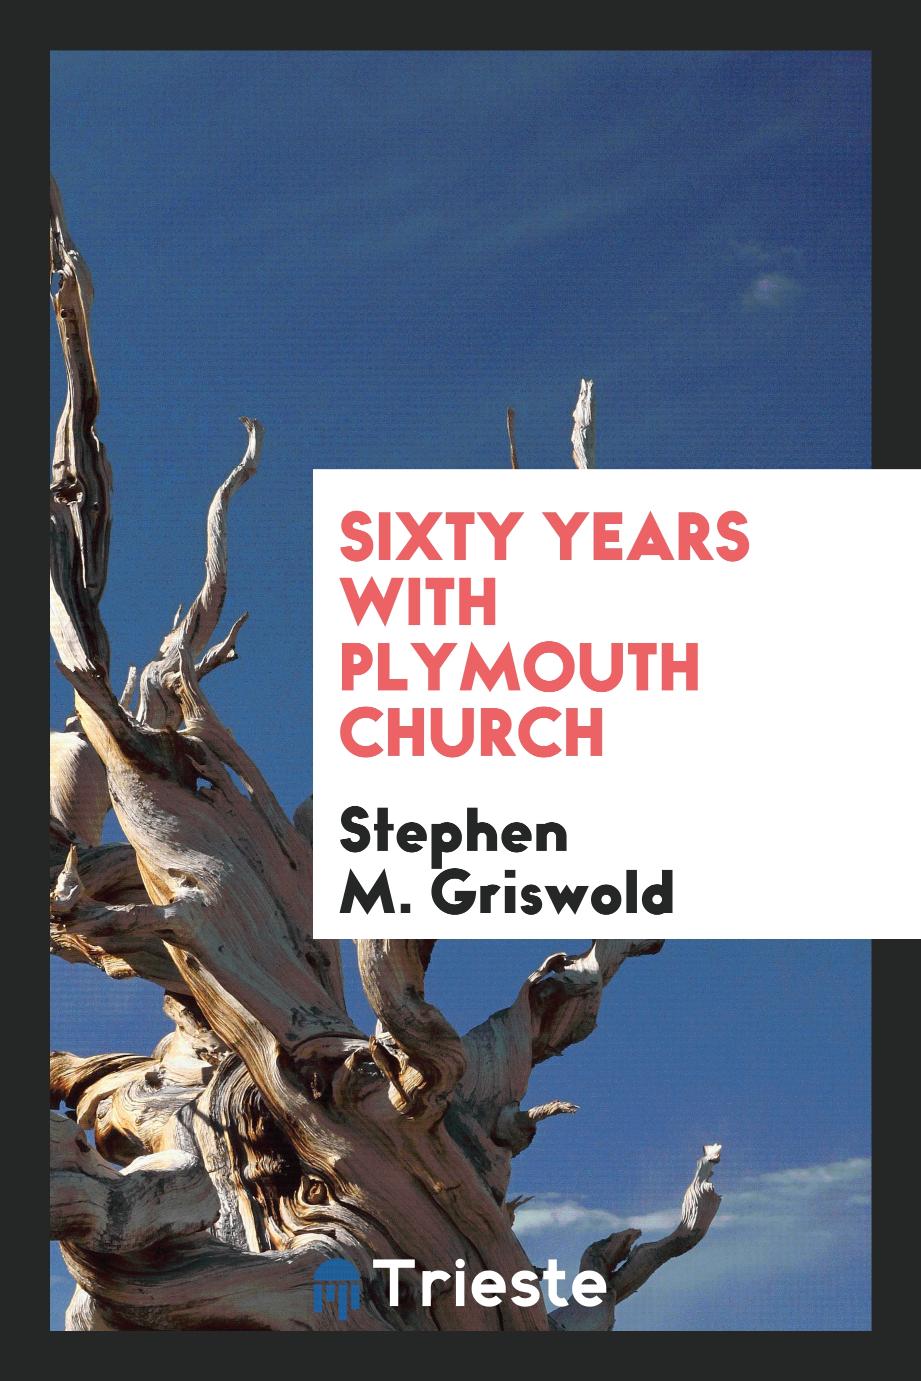 Sixty years with Plymouth Church